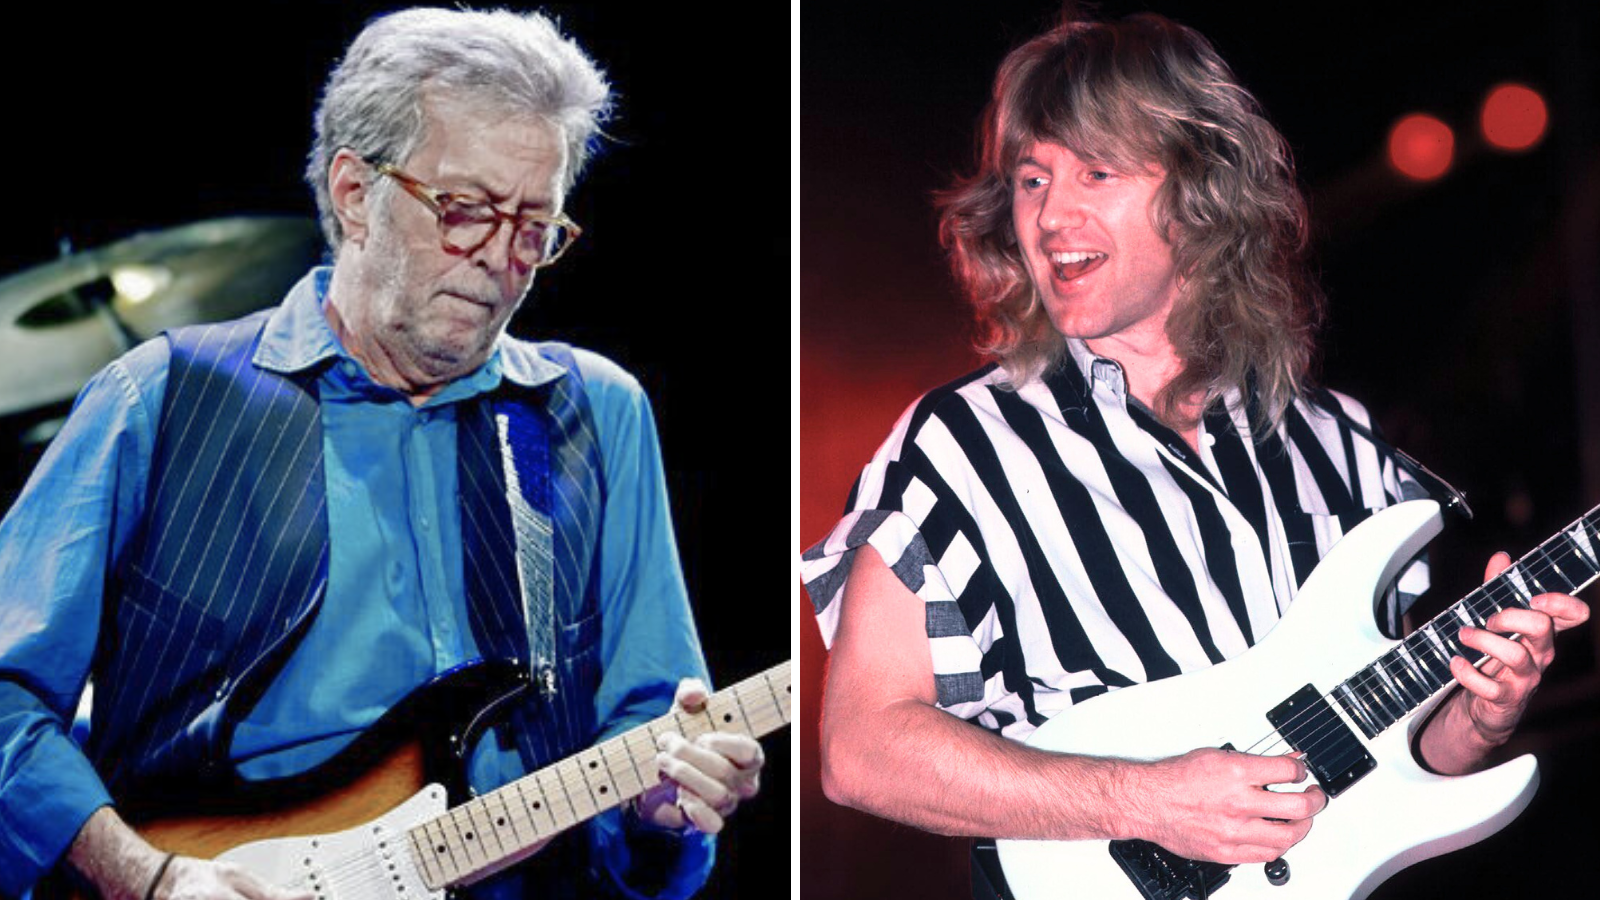 Eric Clapton Has A 'Narrow Palette,' Triumph's Rik Emmett Says: 'There's Things He Lifted That Stayed With Him All Of His Career'